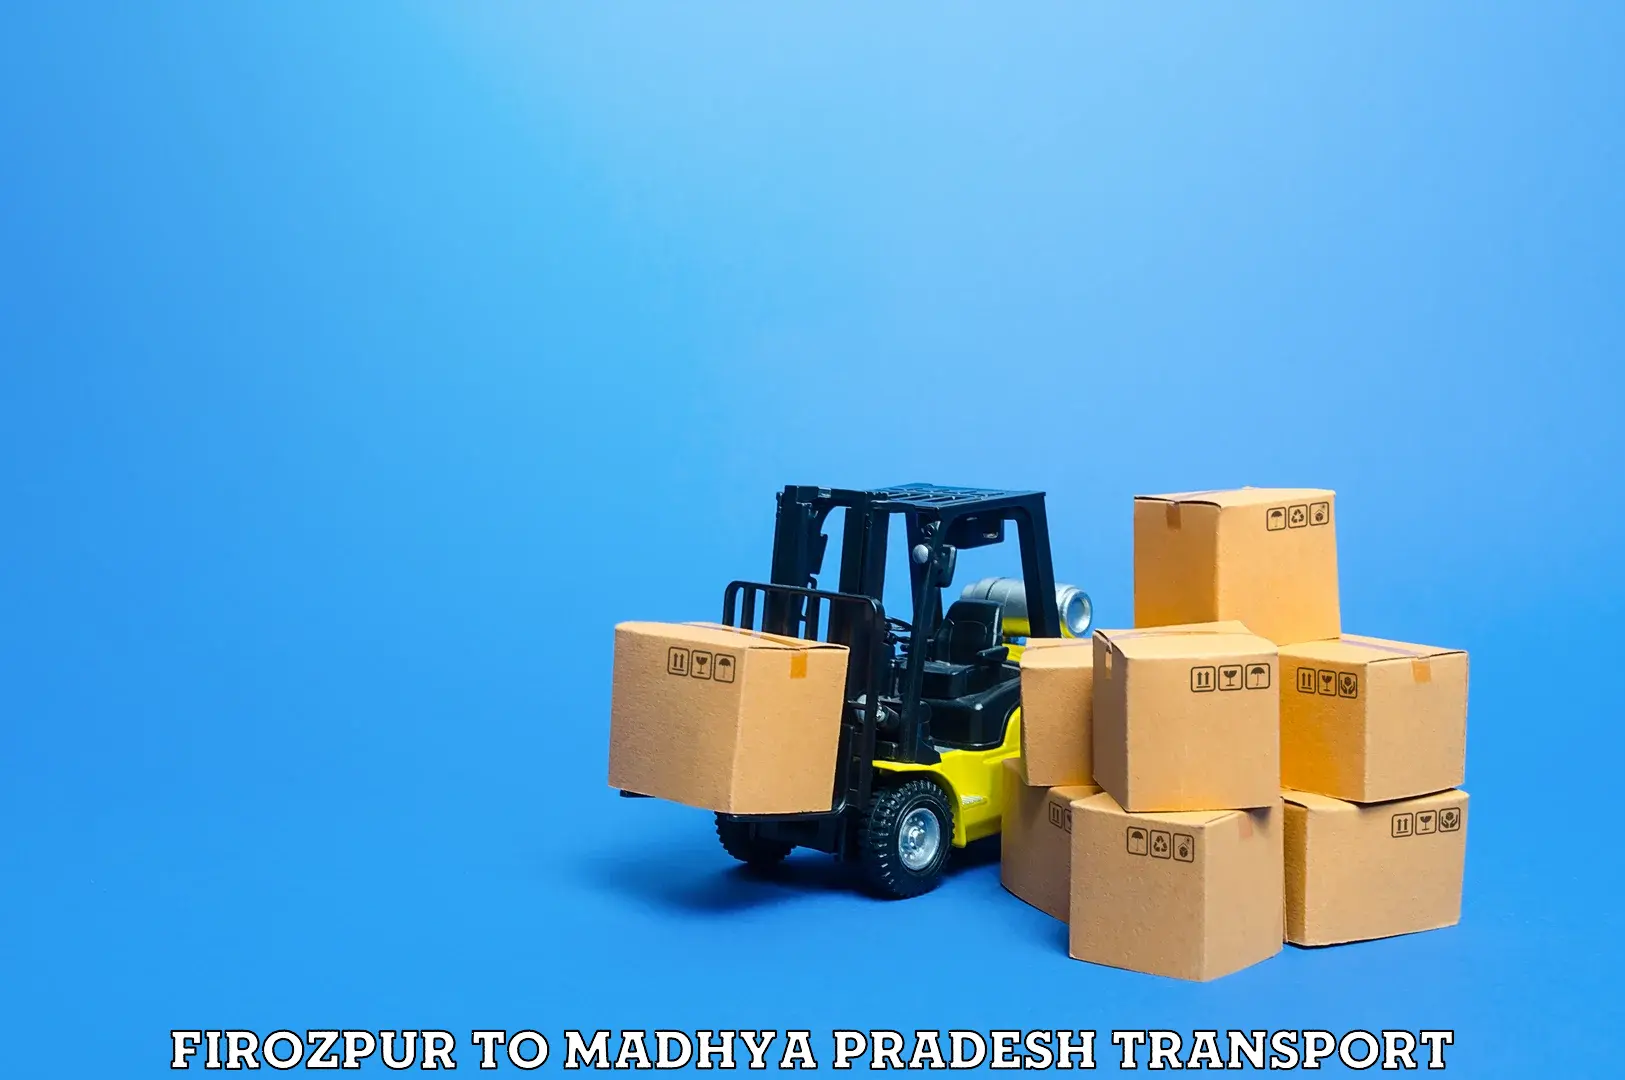 Container transport service Firozpur to Waraseoni